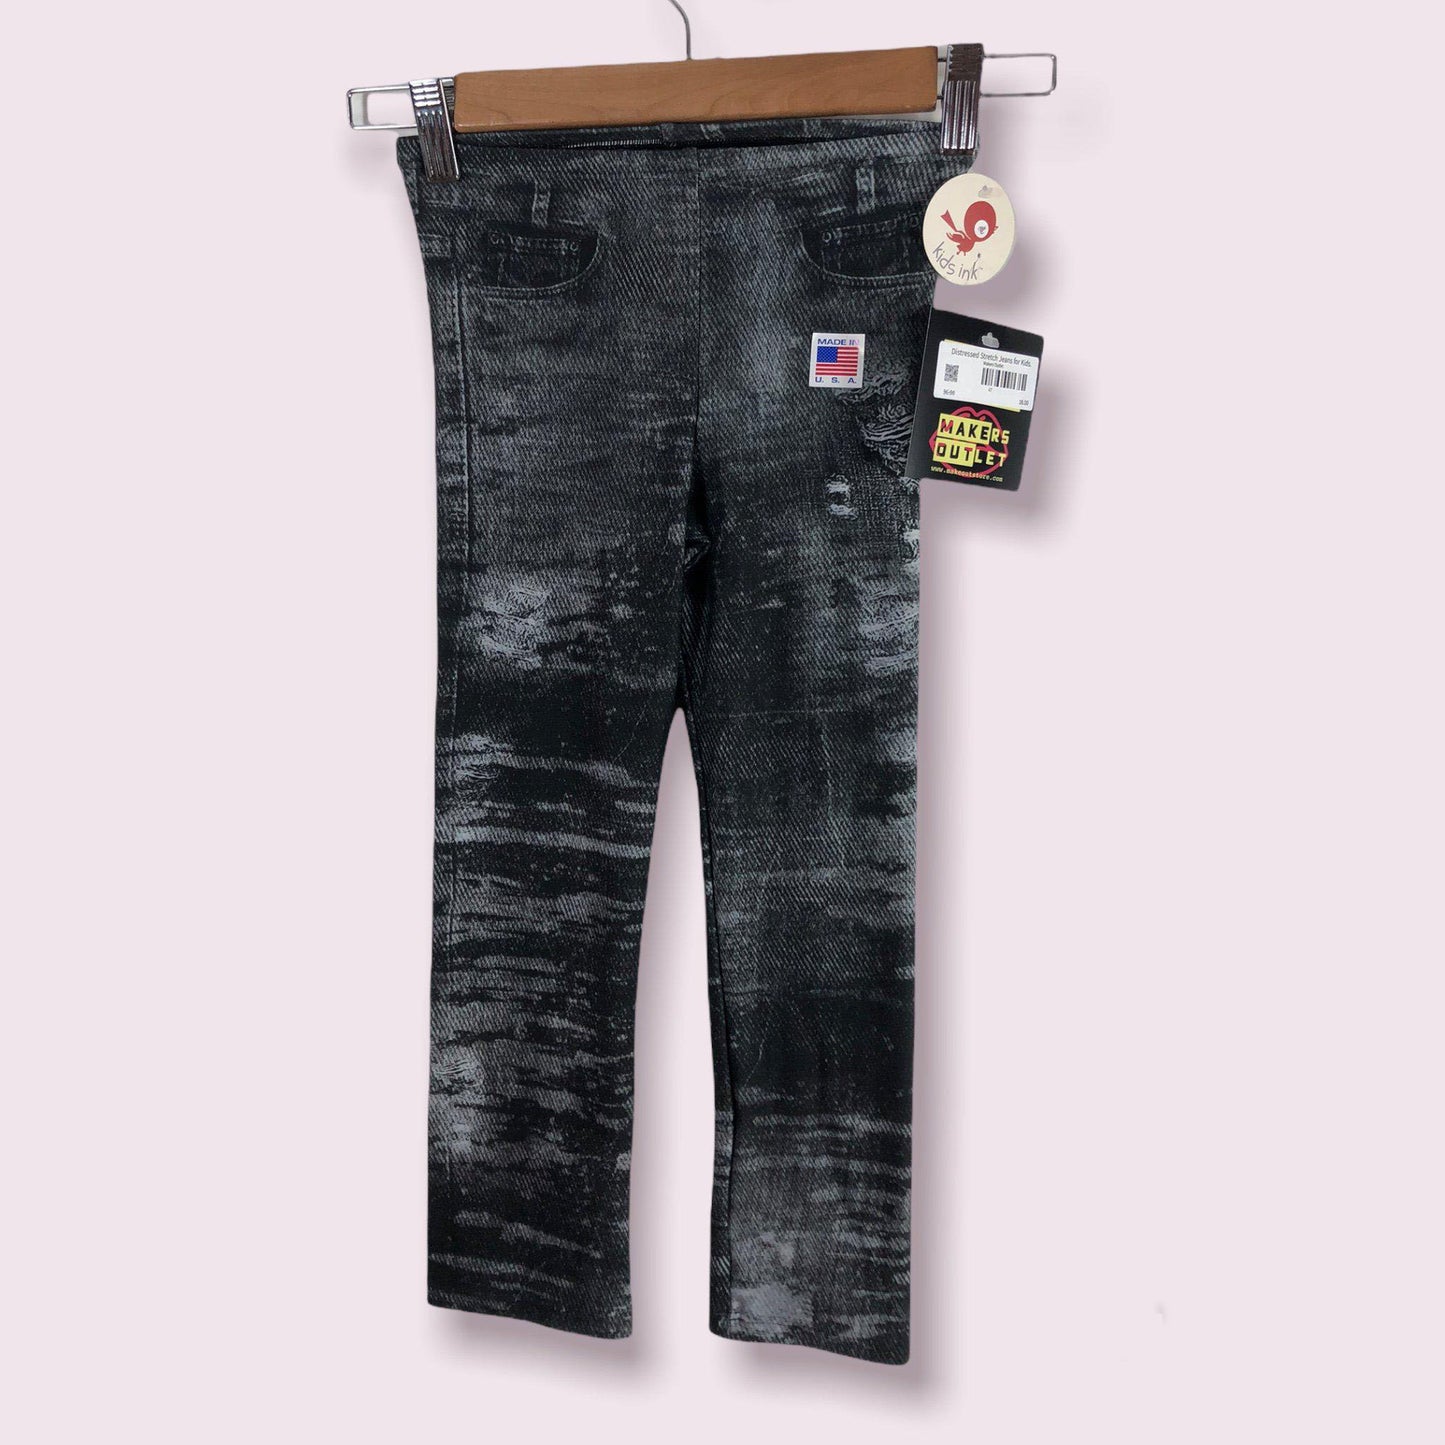 Distressed Stretch Jeans for Kids. Stretchy Leggings-6T-